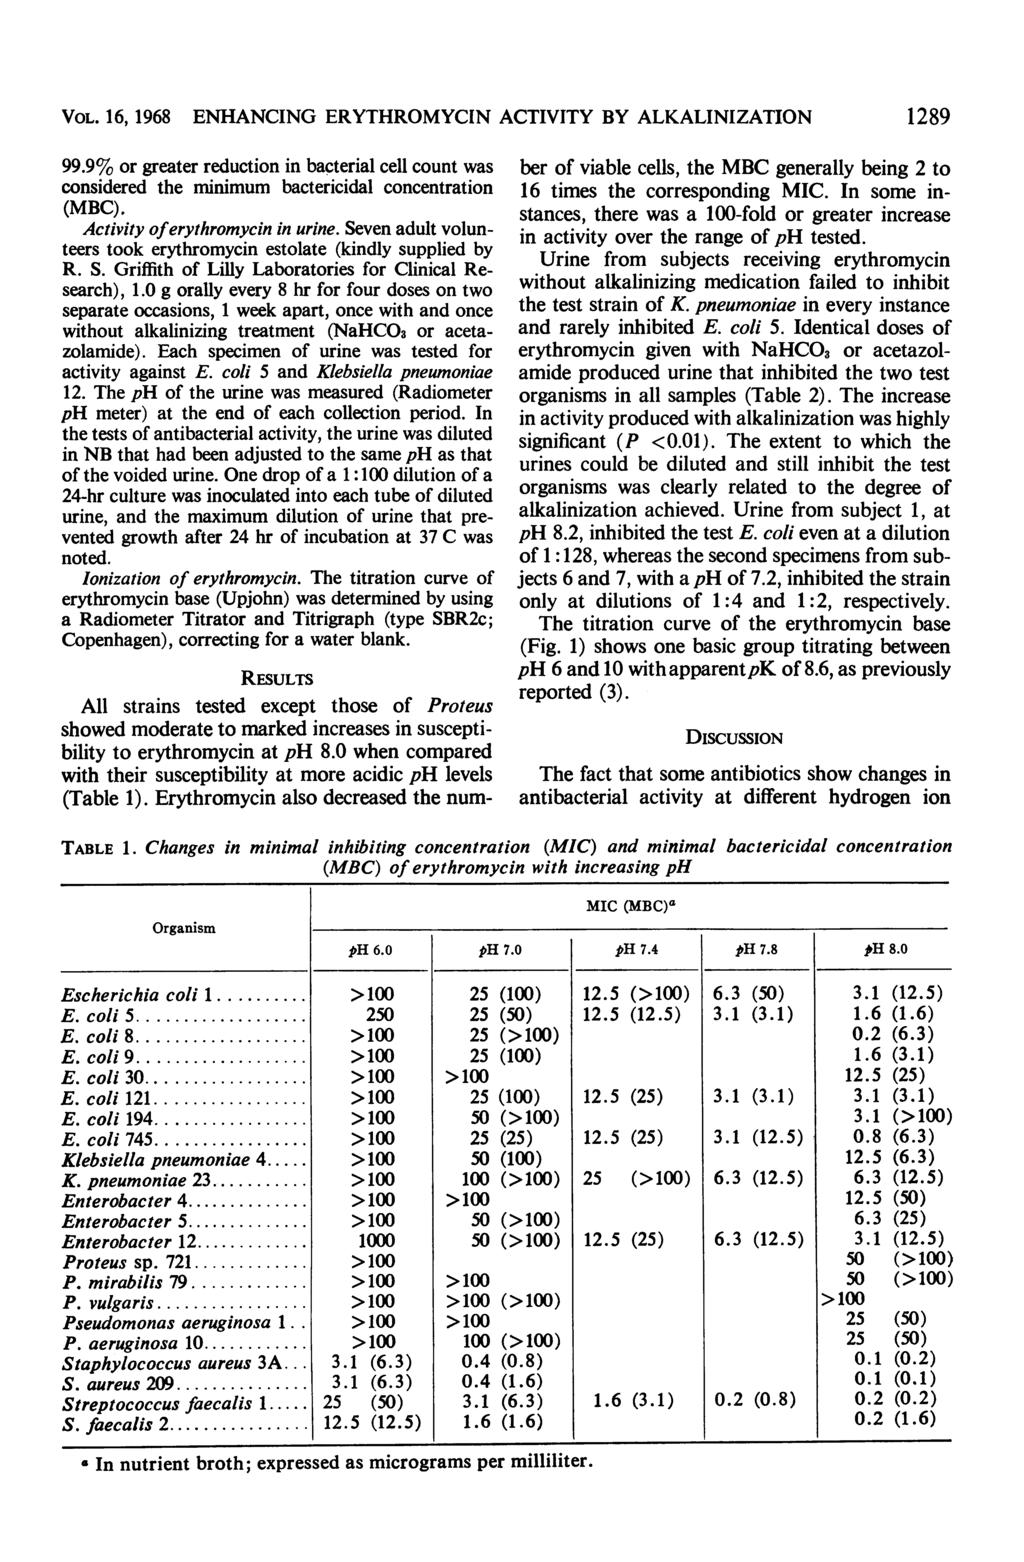 VOL. 6, 968 ENHANCING ERYTHROMYCIN ACTIVITY BY ALKALINIZATION 89 99.9% or greater reduction in bacterial cell count was considered the minimum bactericidal concentration (MBC).